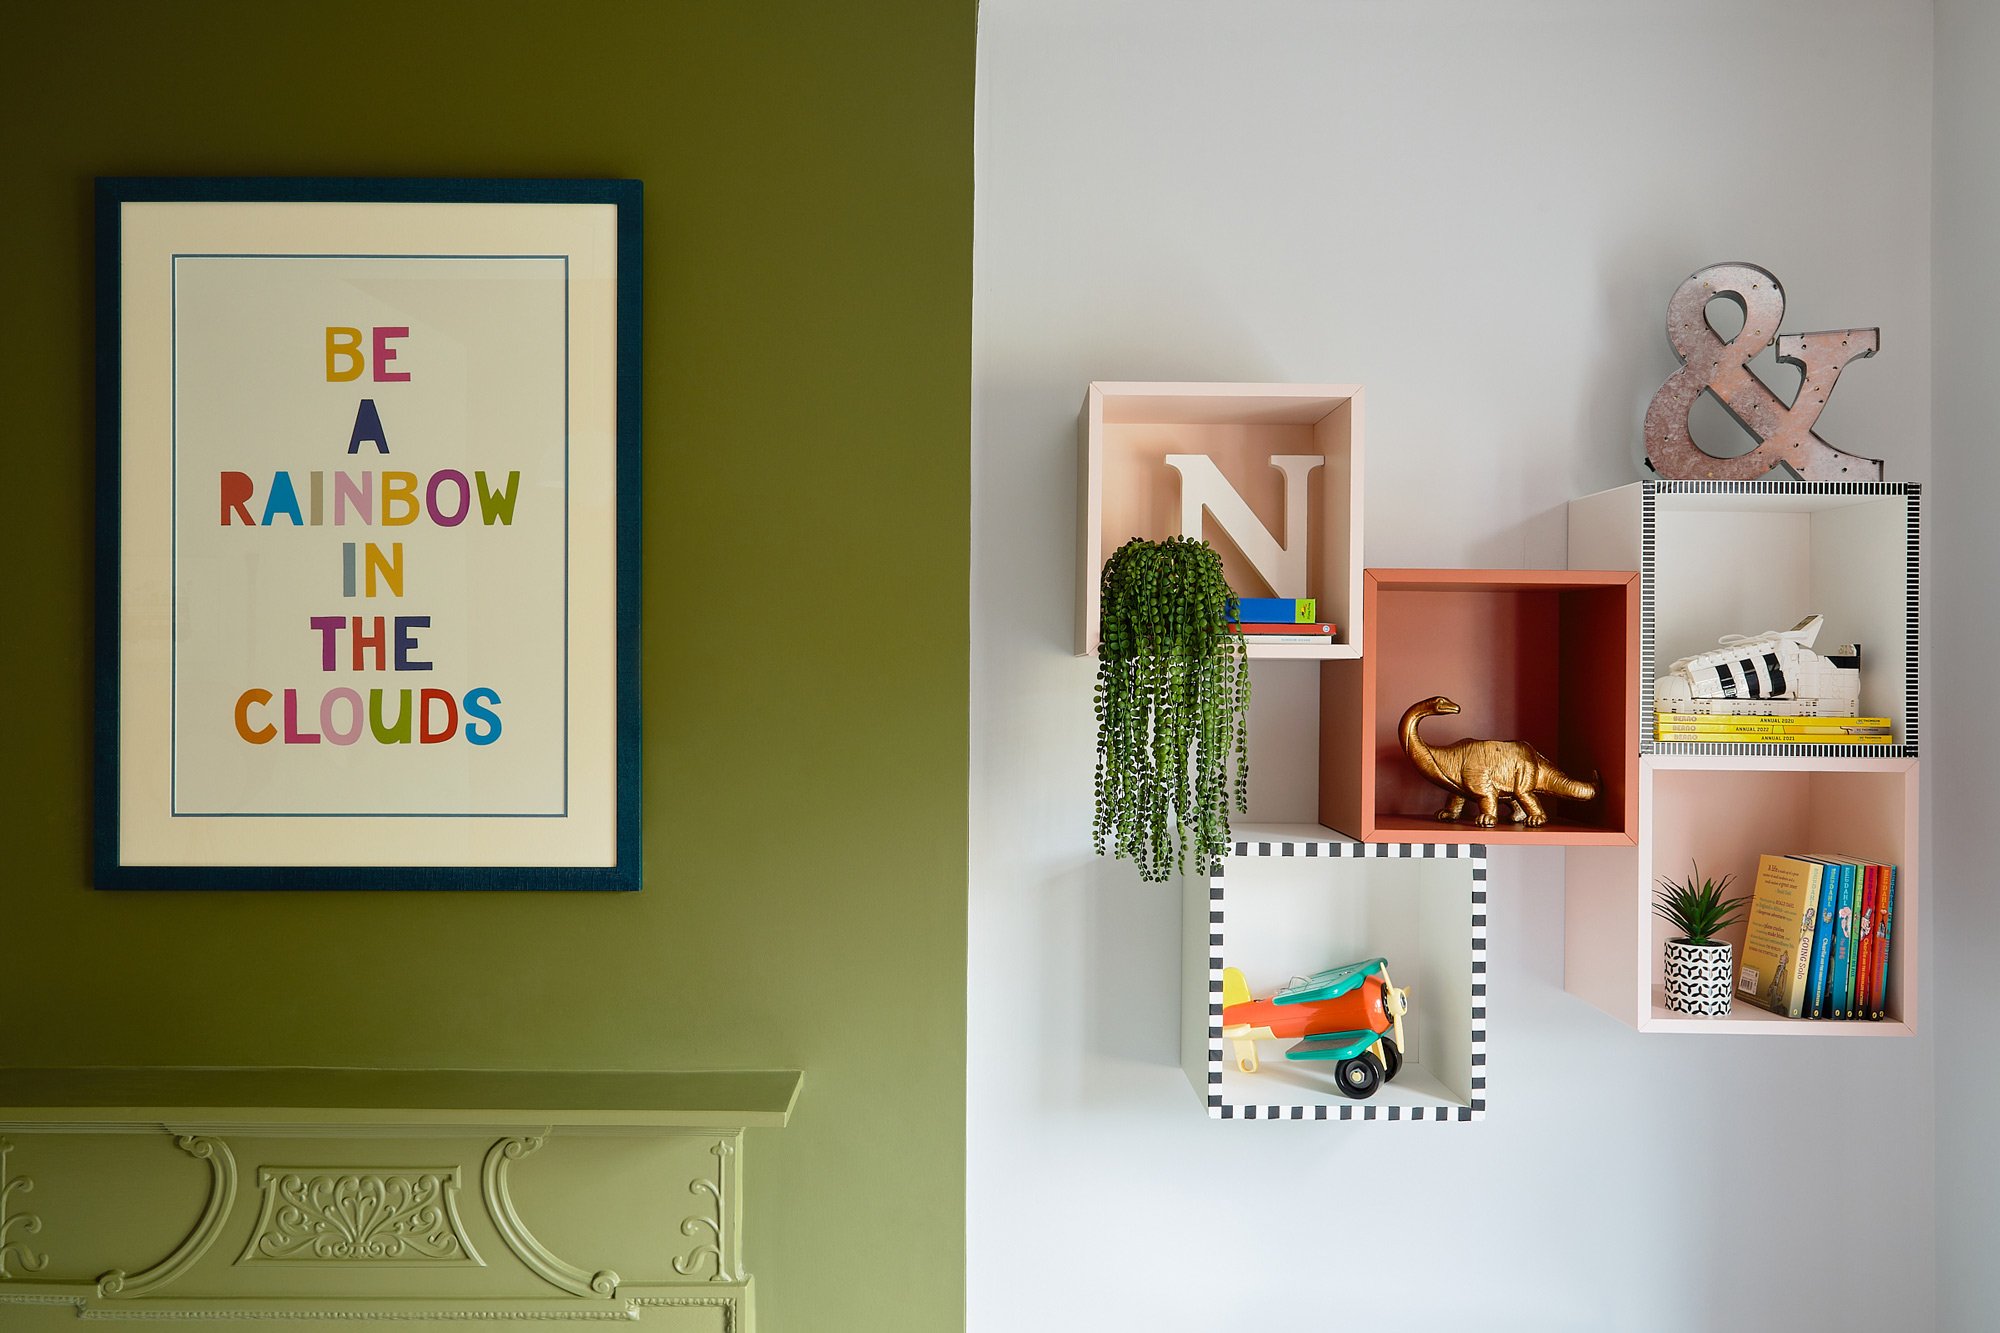 framed-poster-on-green-wall-next-to-storage-cube-shelving.jpg